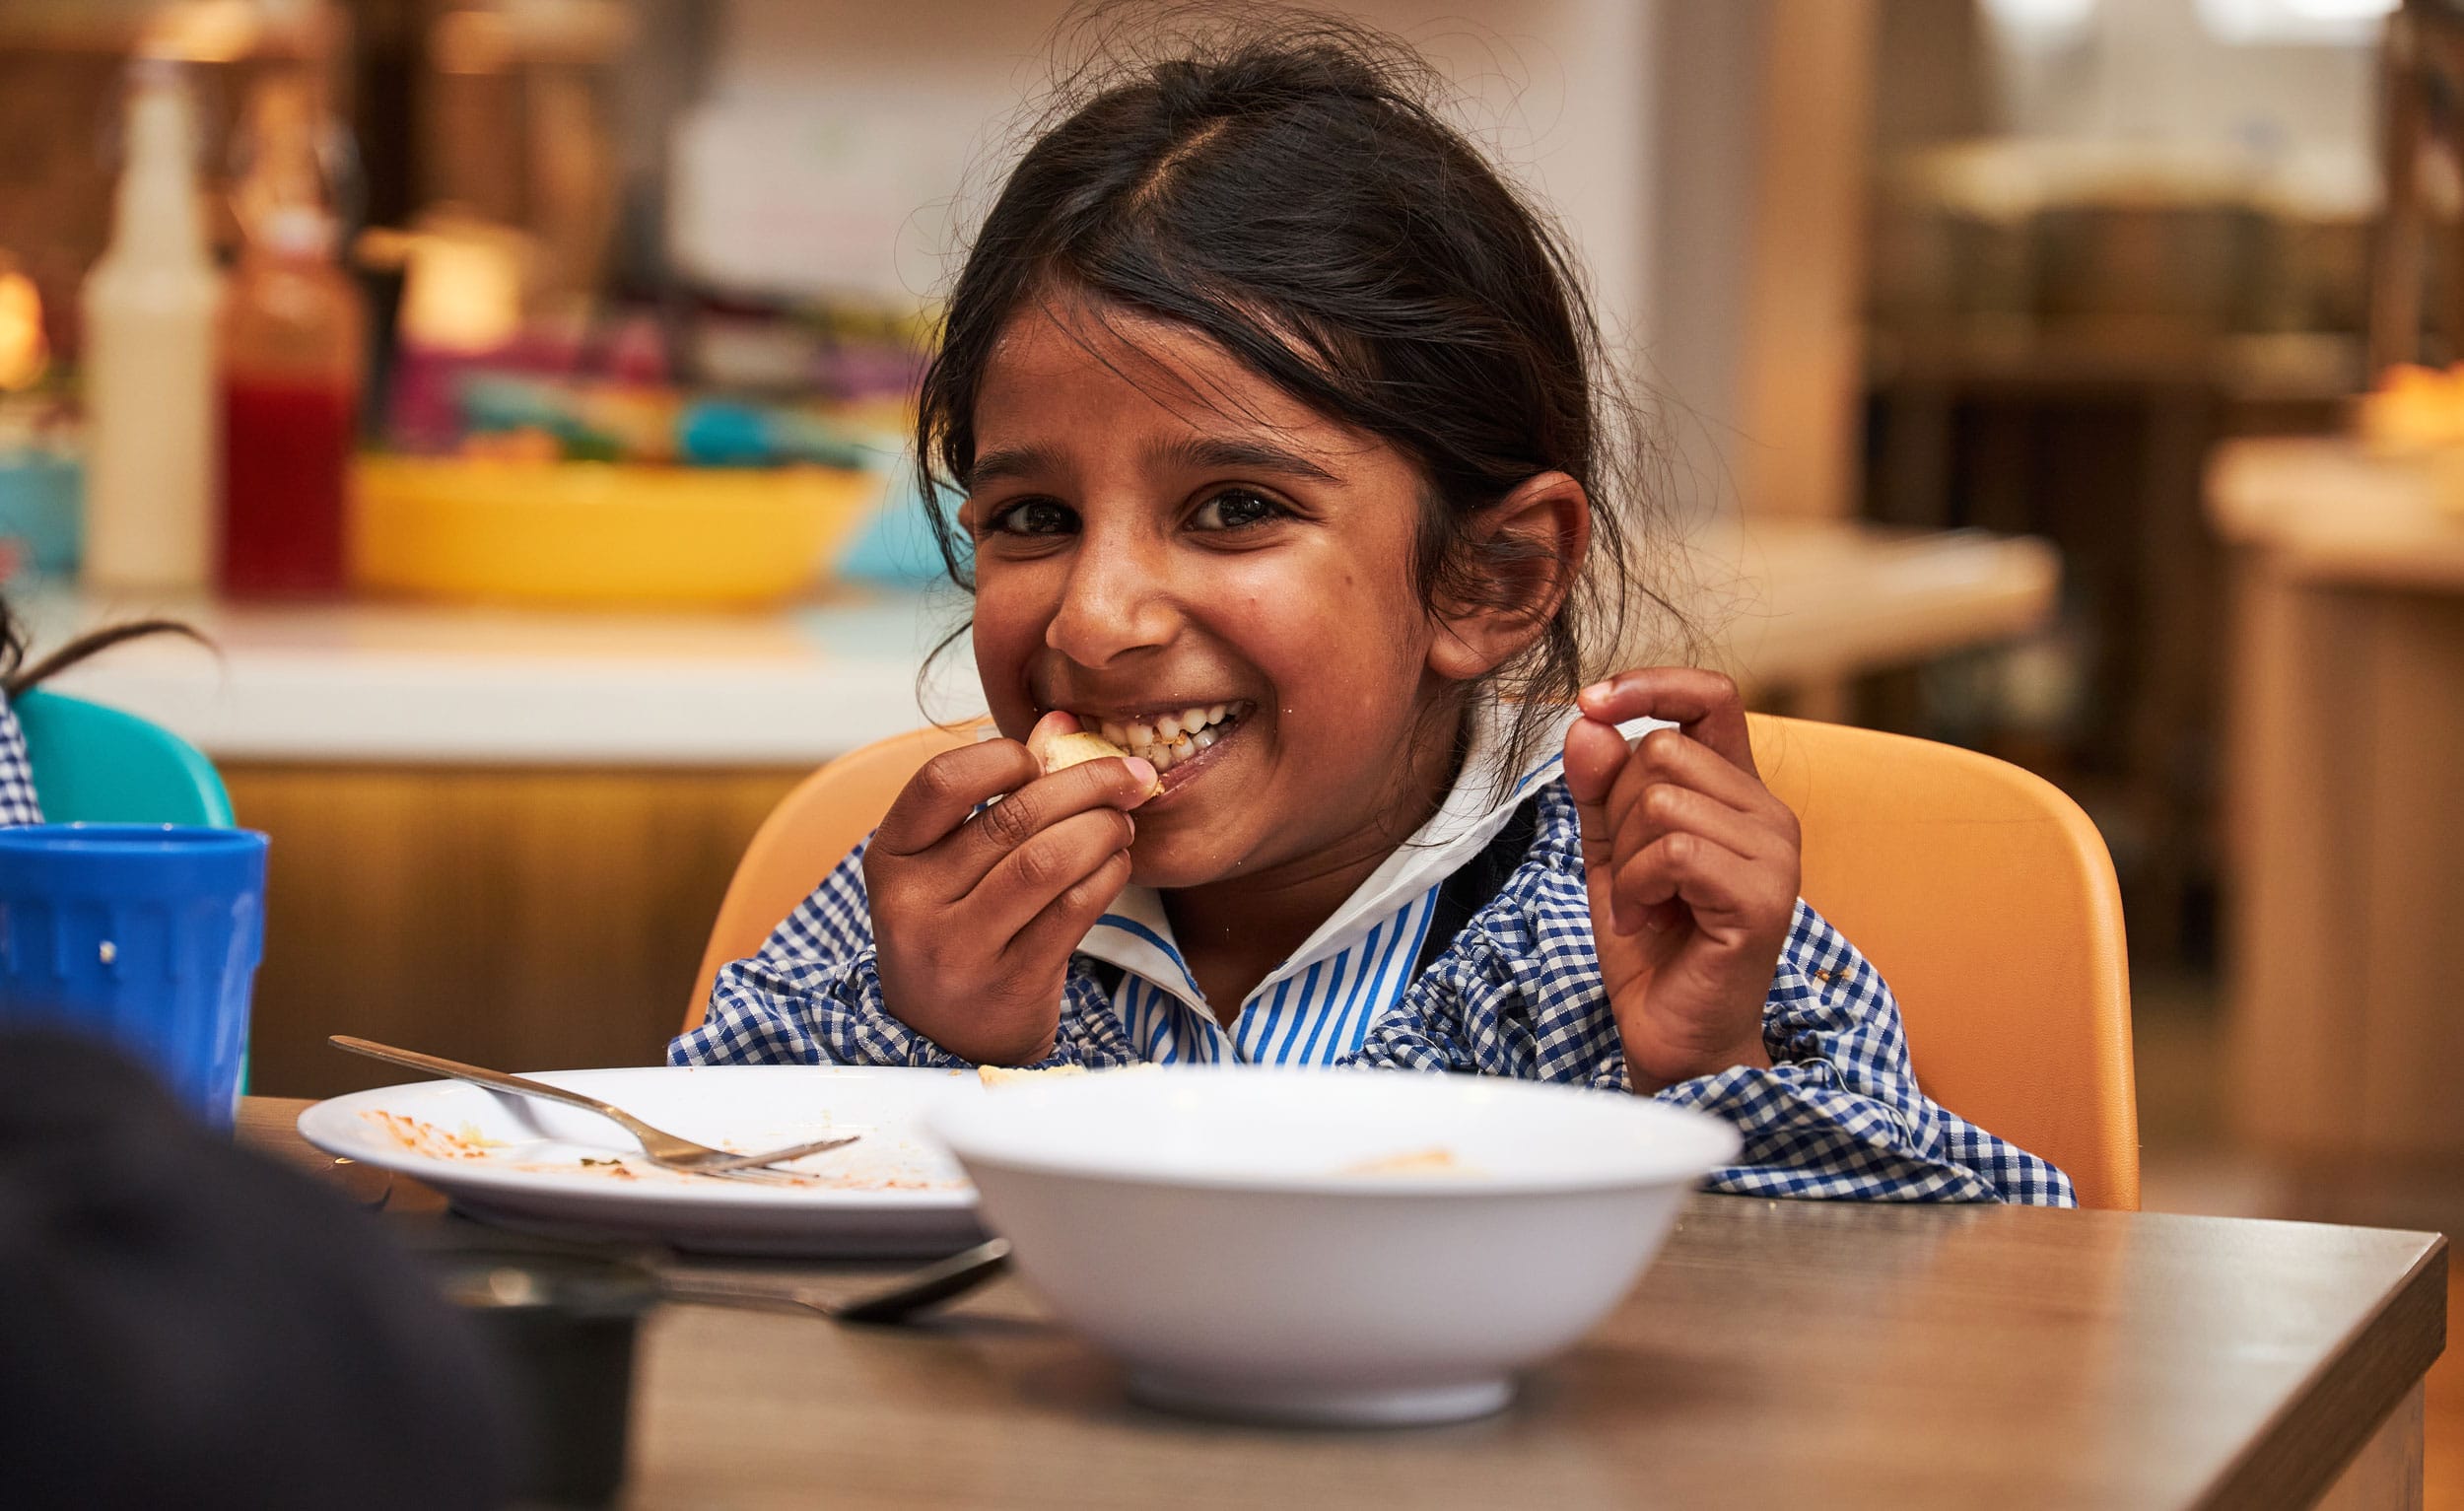 A girl eating from a bowl in The Blue Coat School Dining Hall.